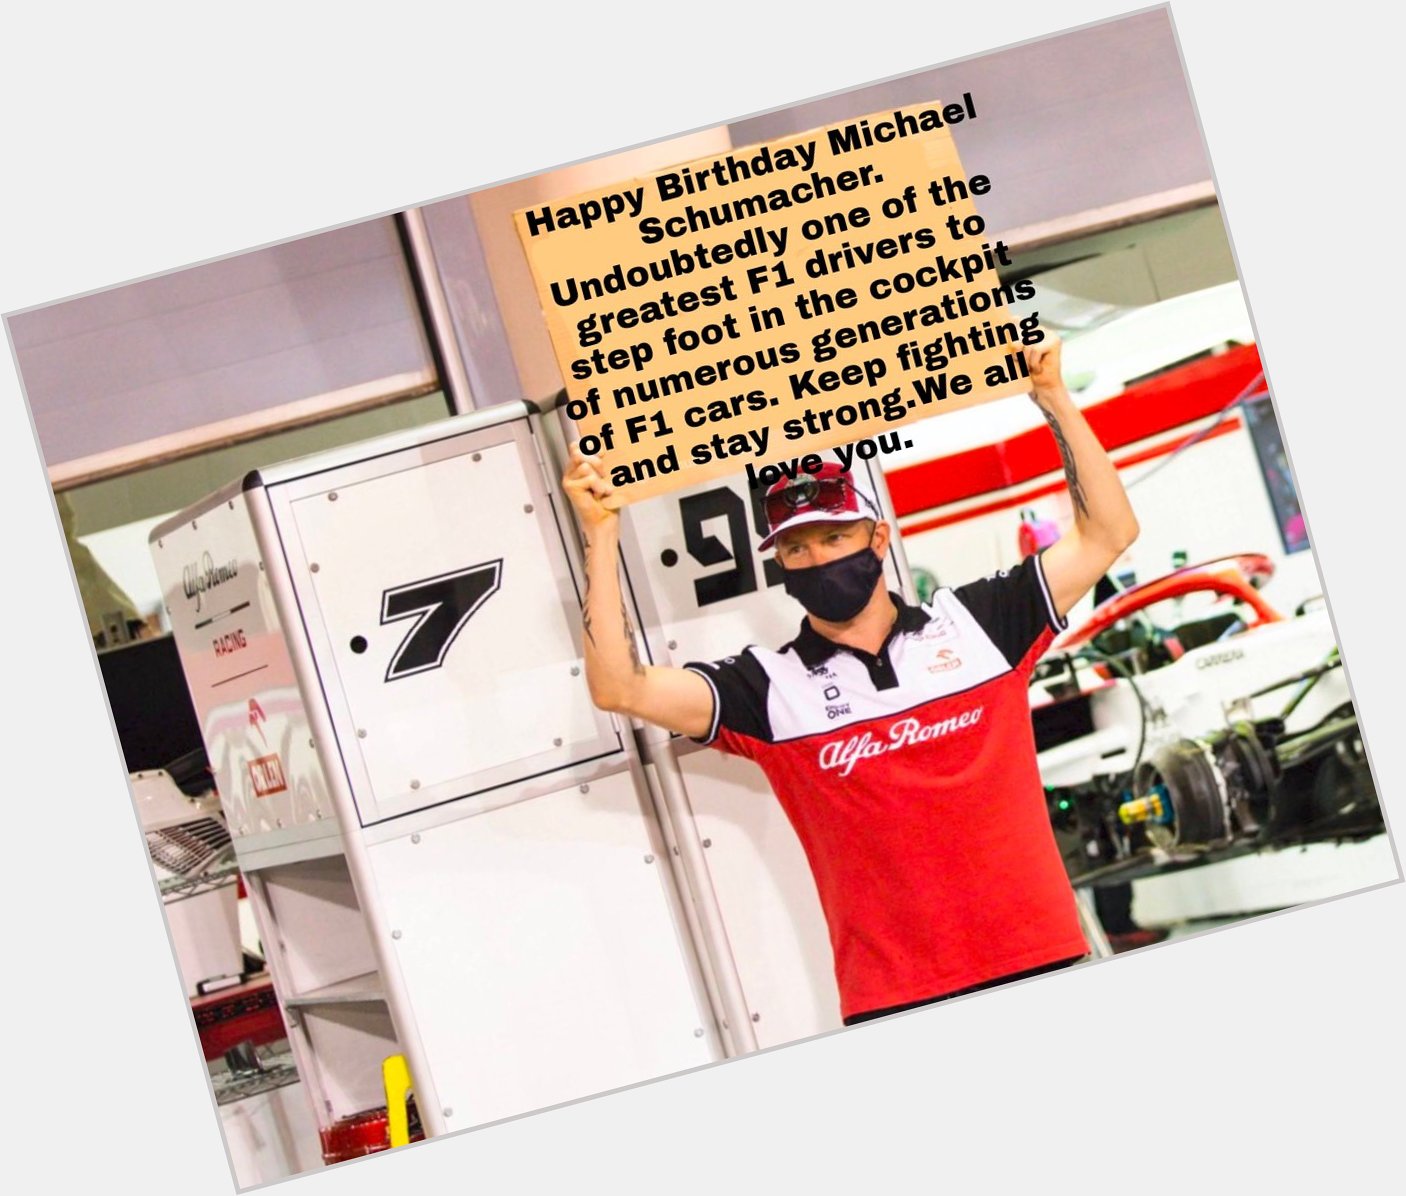 The infamous sign is back to wish Michael Schumacher a happy Birthday. 